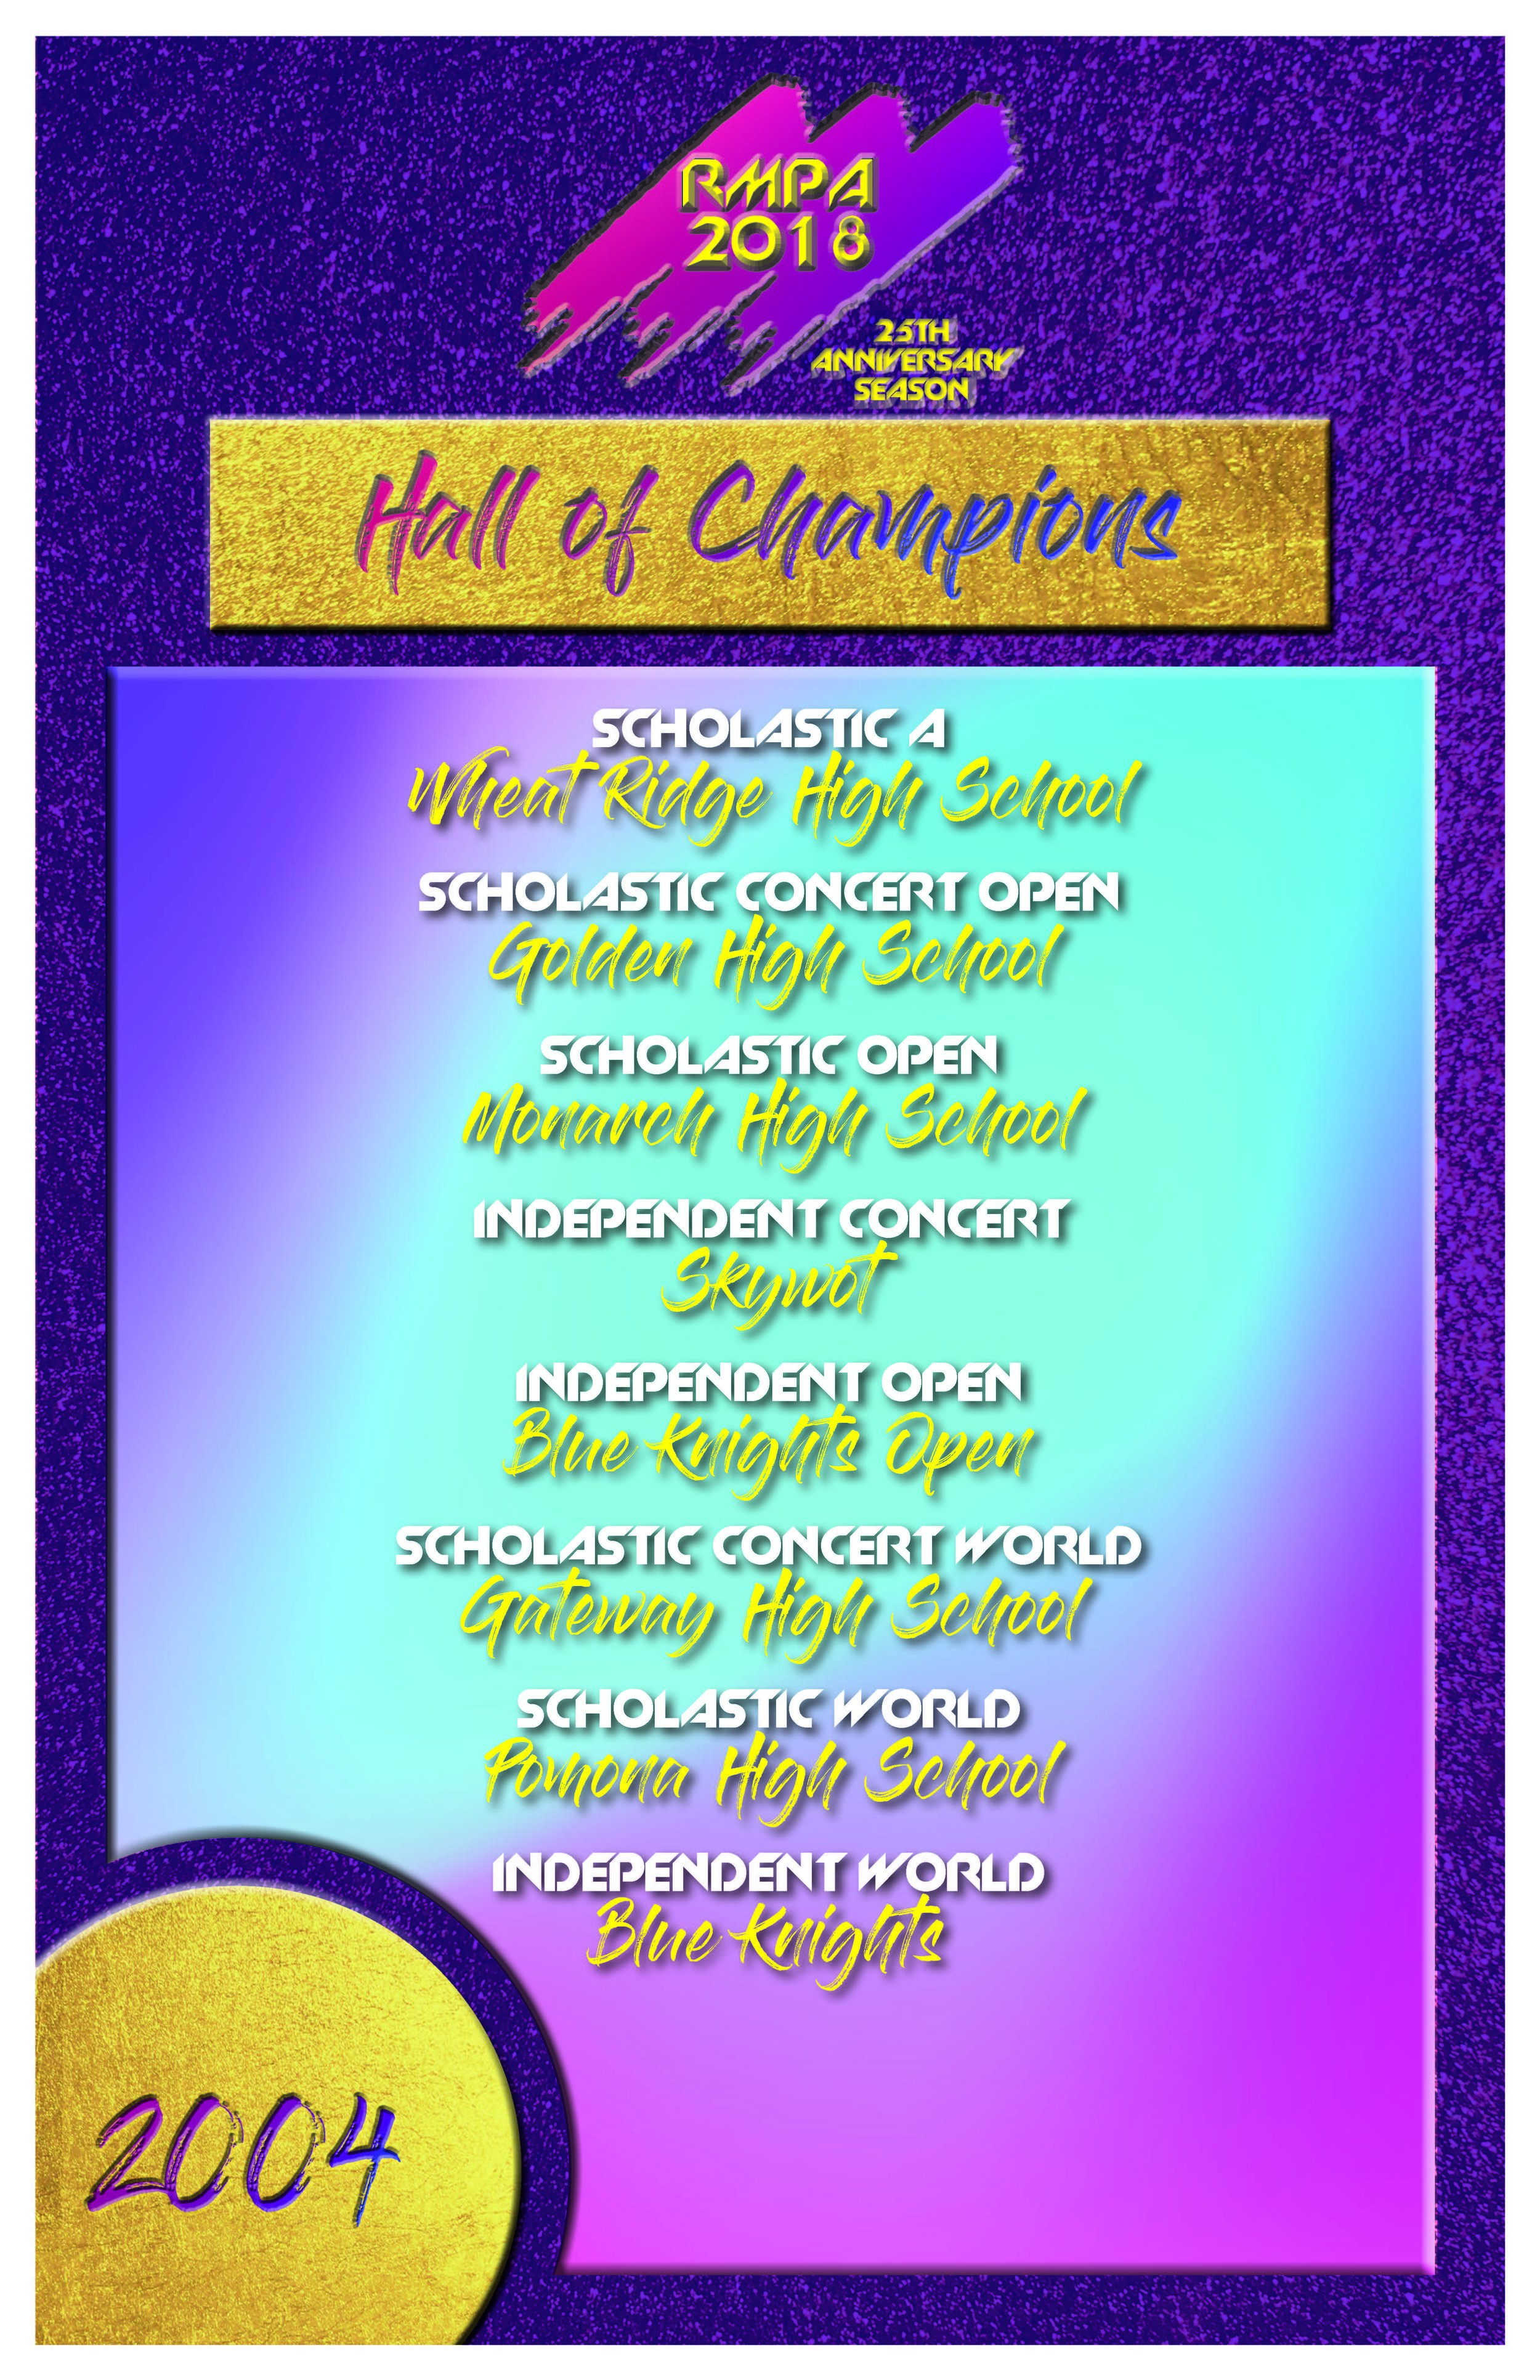 Hall of Champions Posters_Page_12.jpg